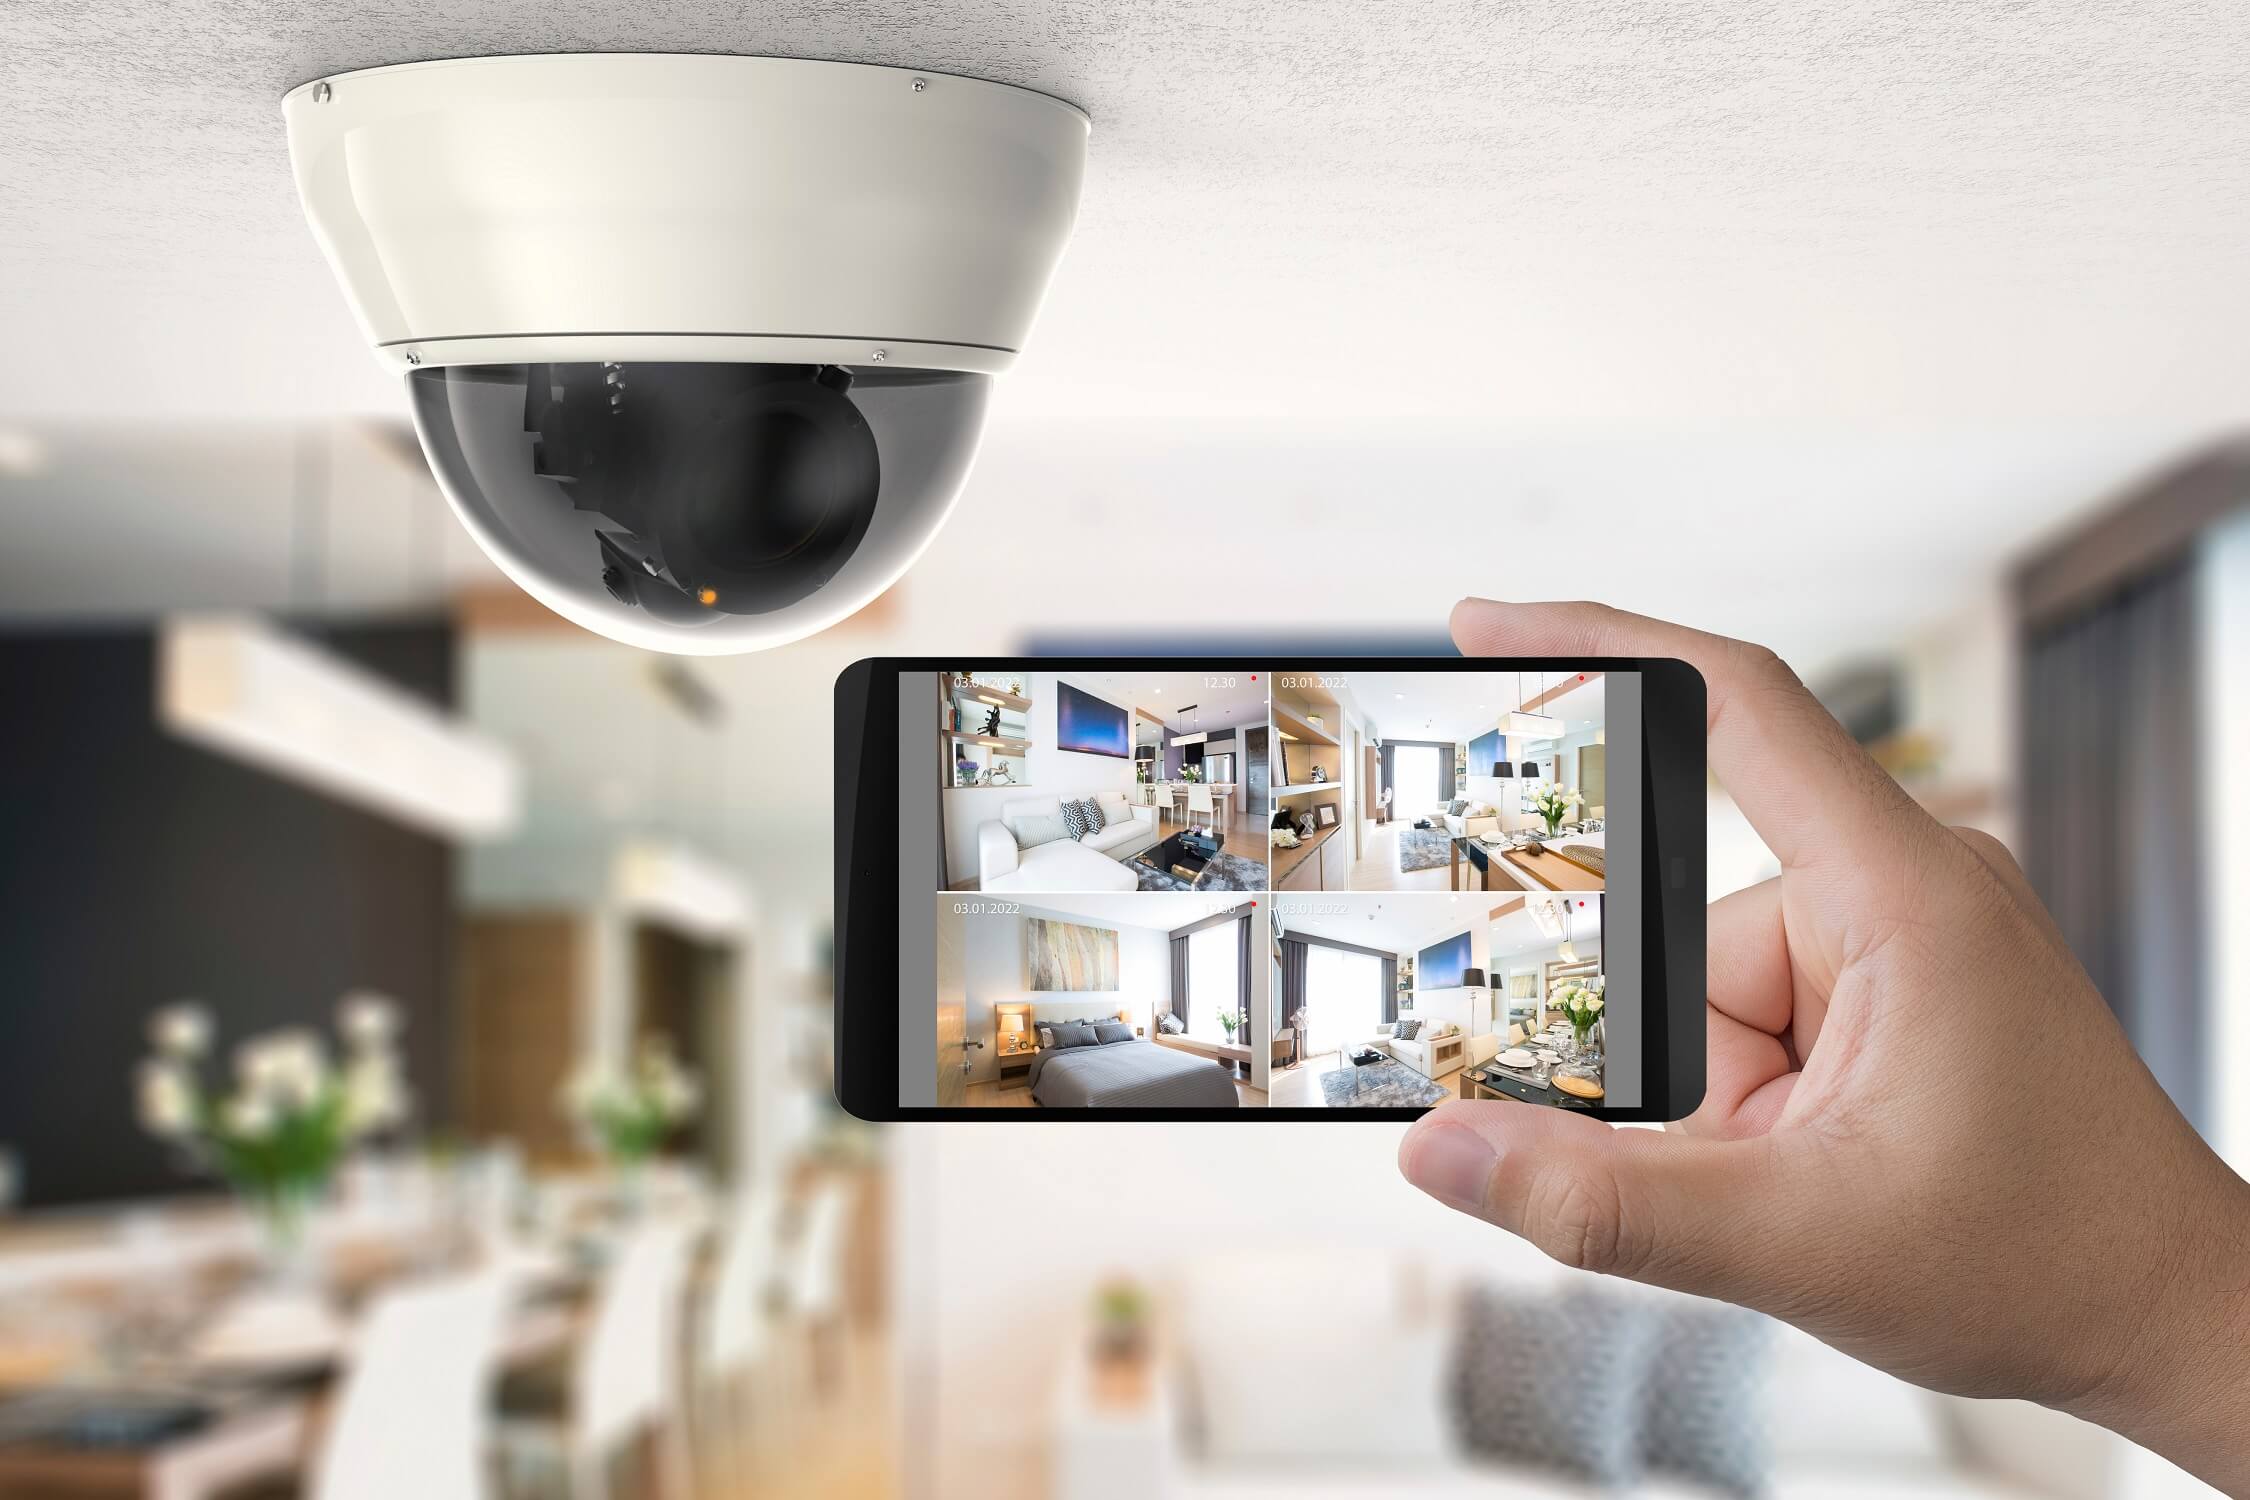 Security Camera & Alert Devices